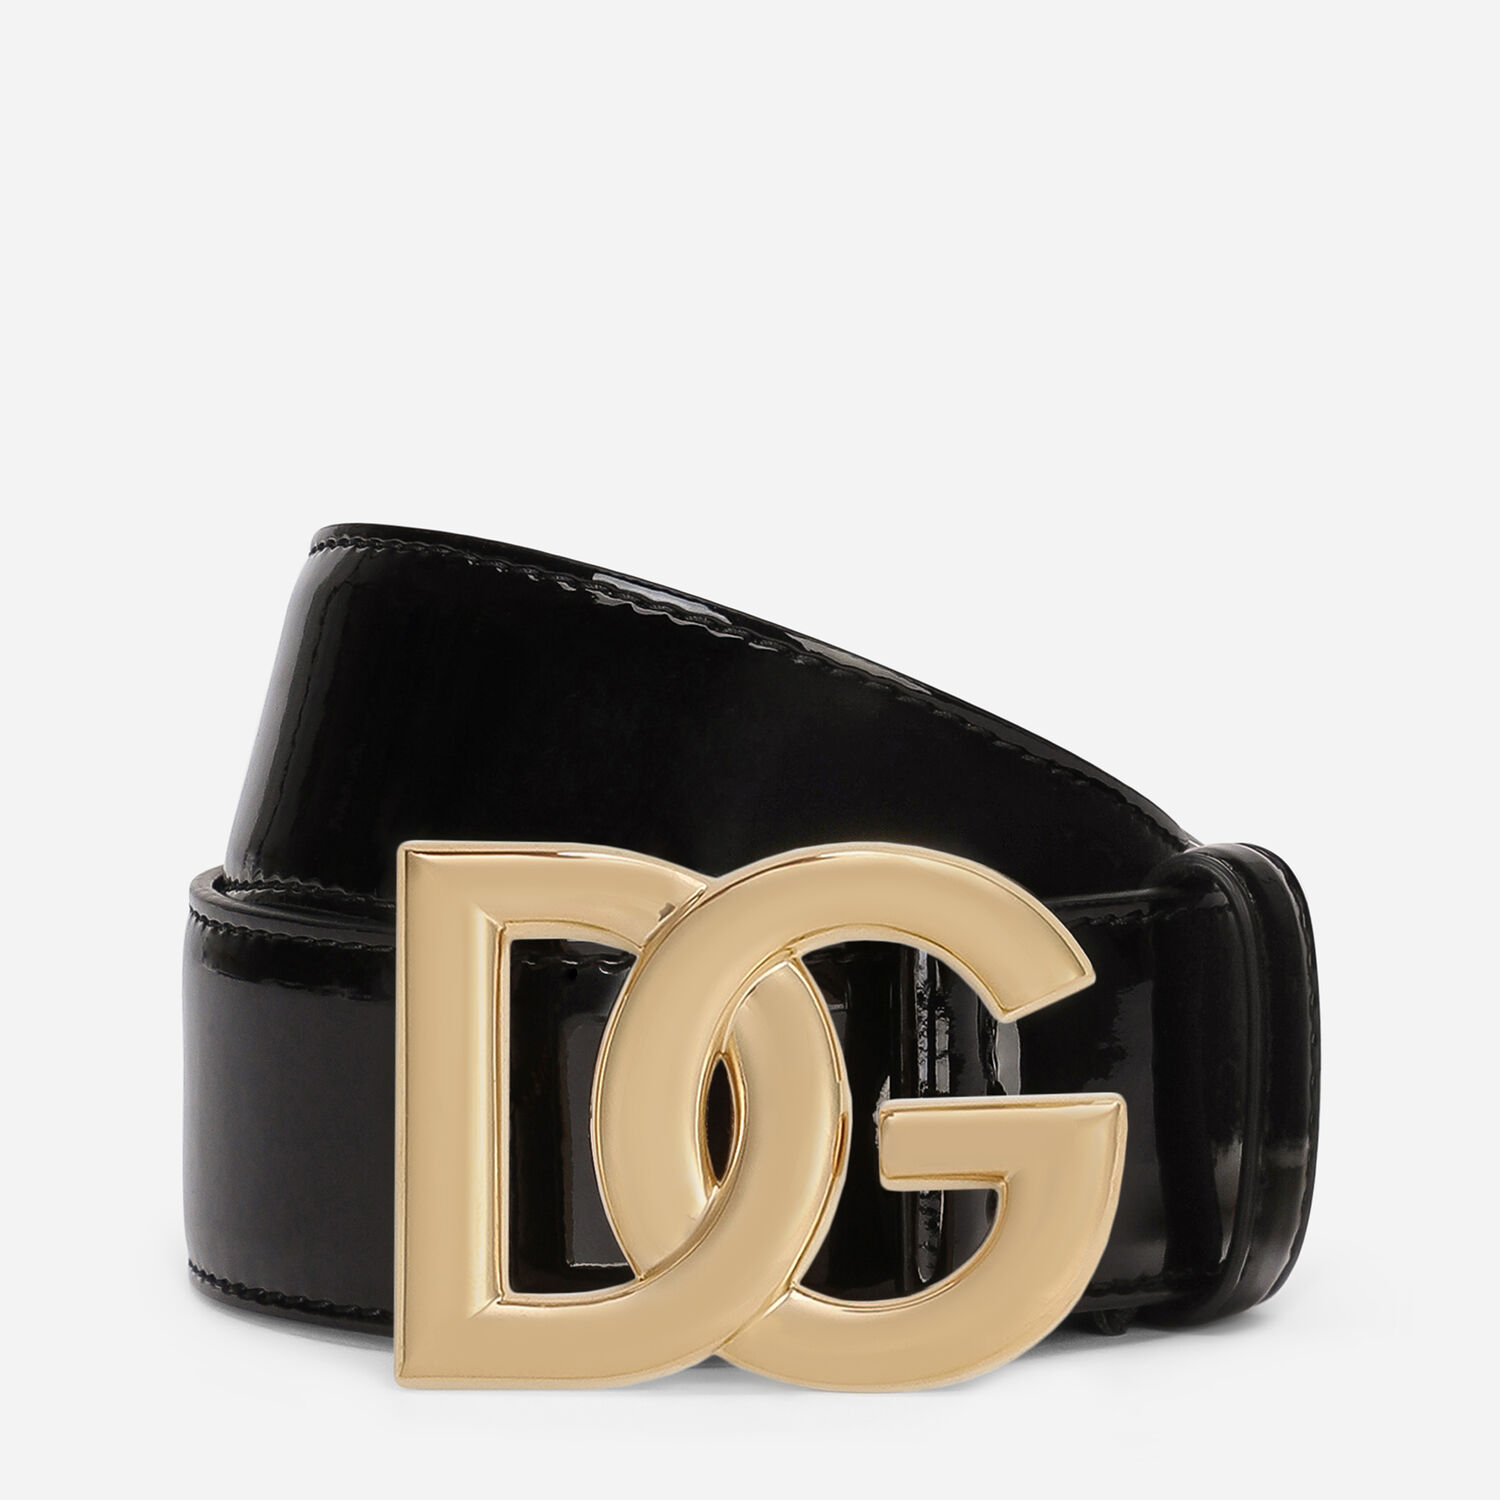 Patent leather belt in | Black with for logo Dolce&Gabbana® DG US